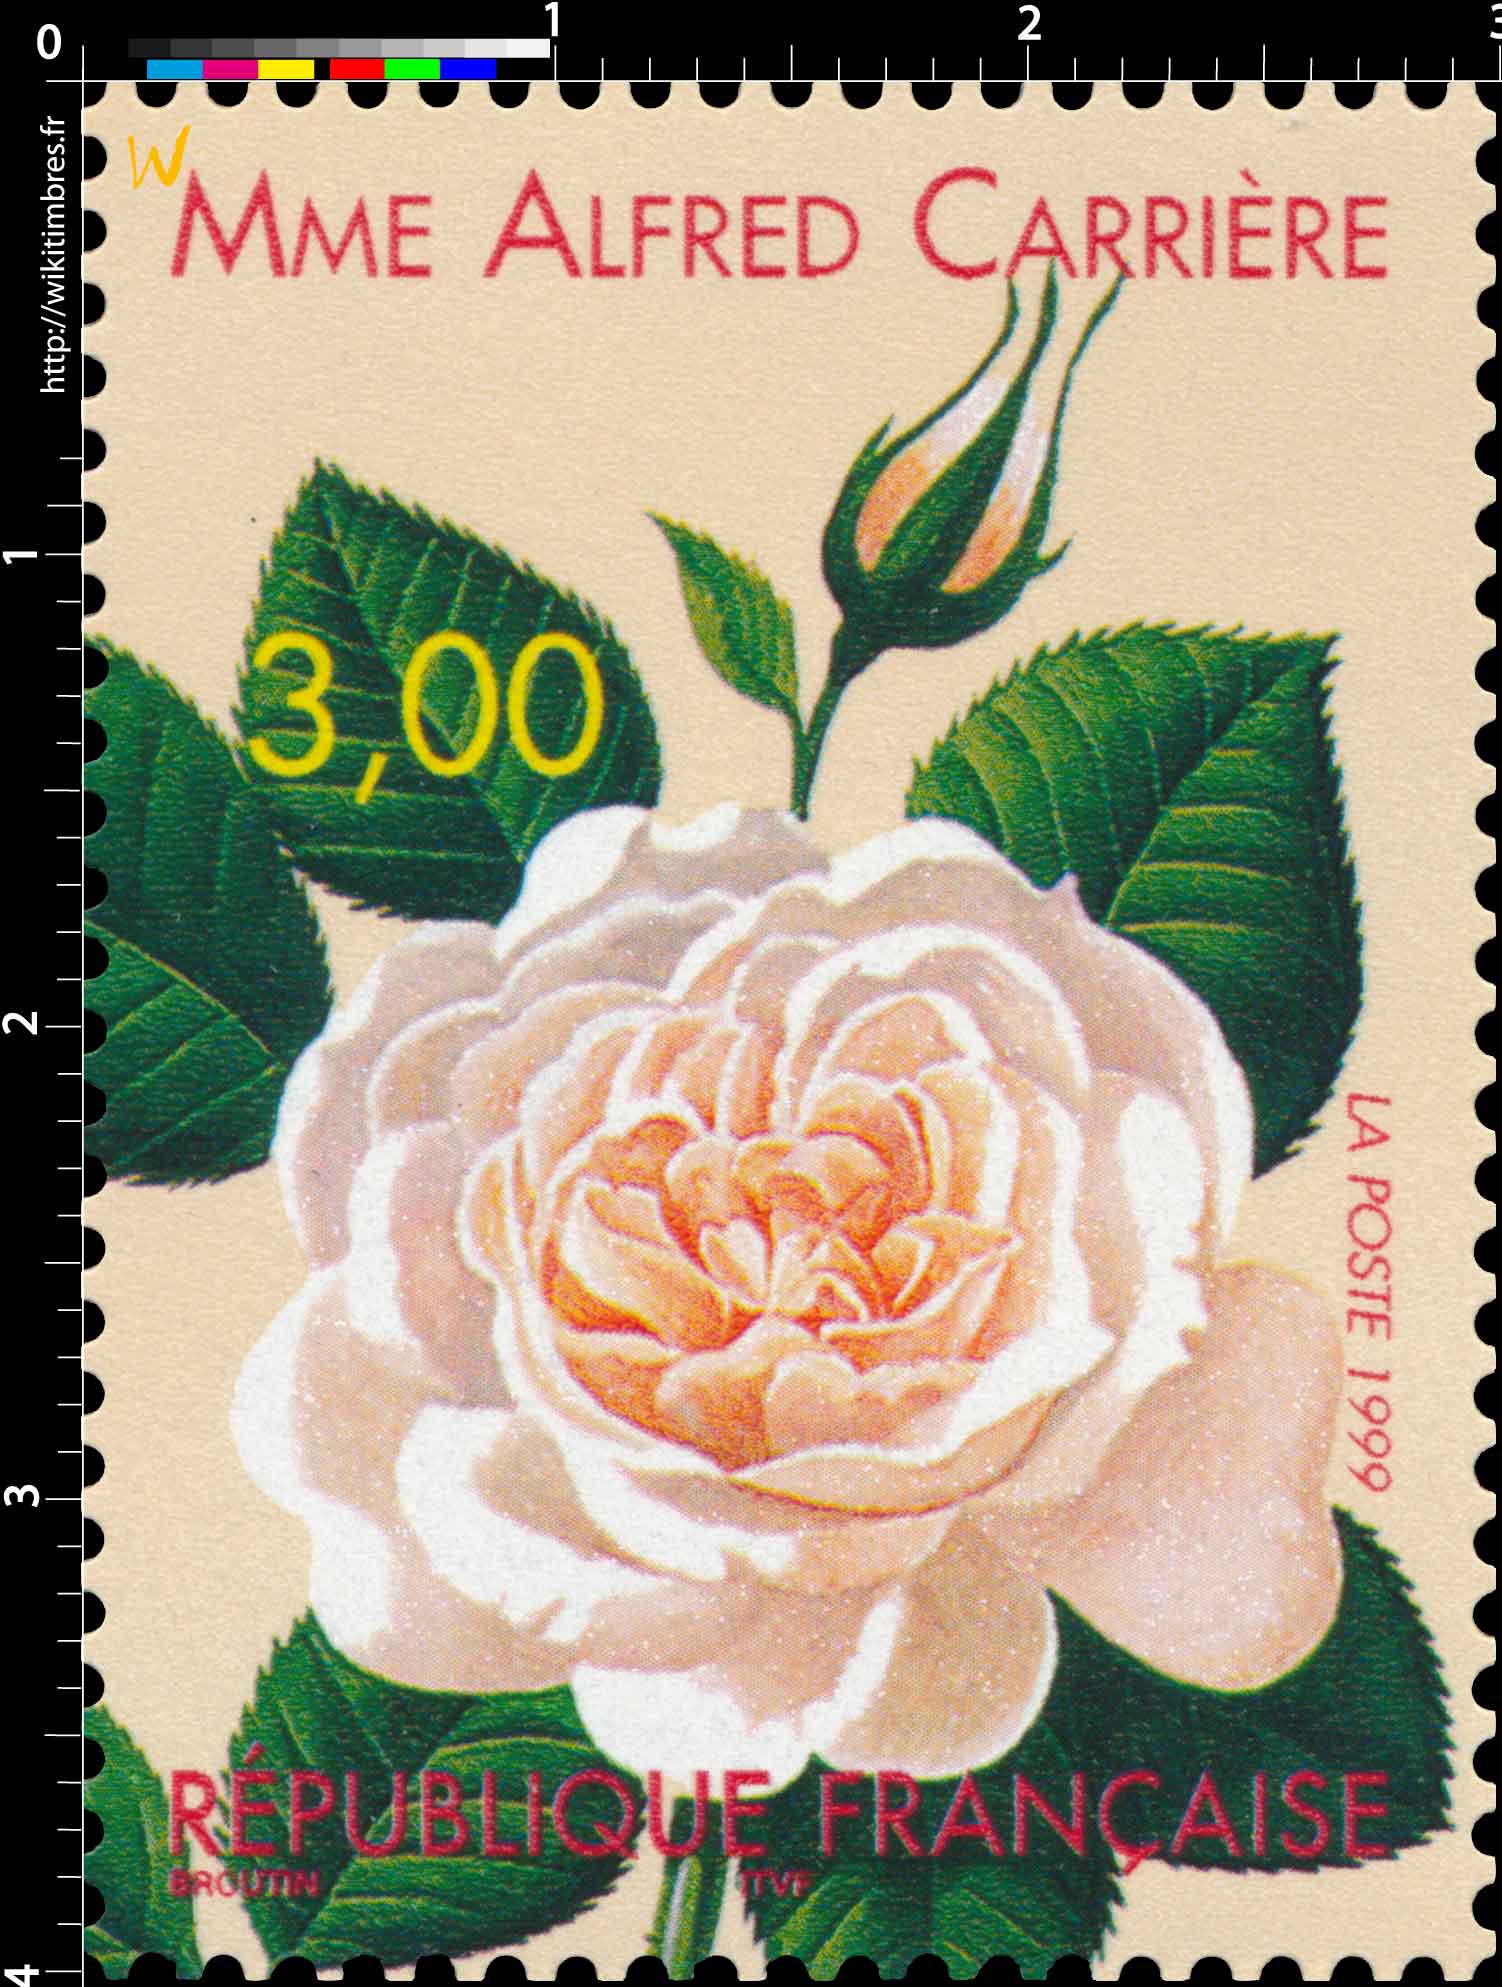 1999 MME ALFRED CARRIÈRE